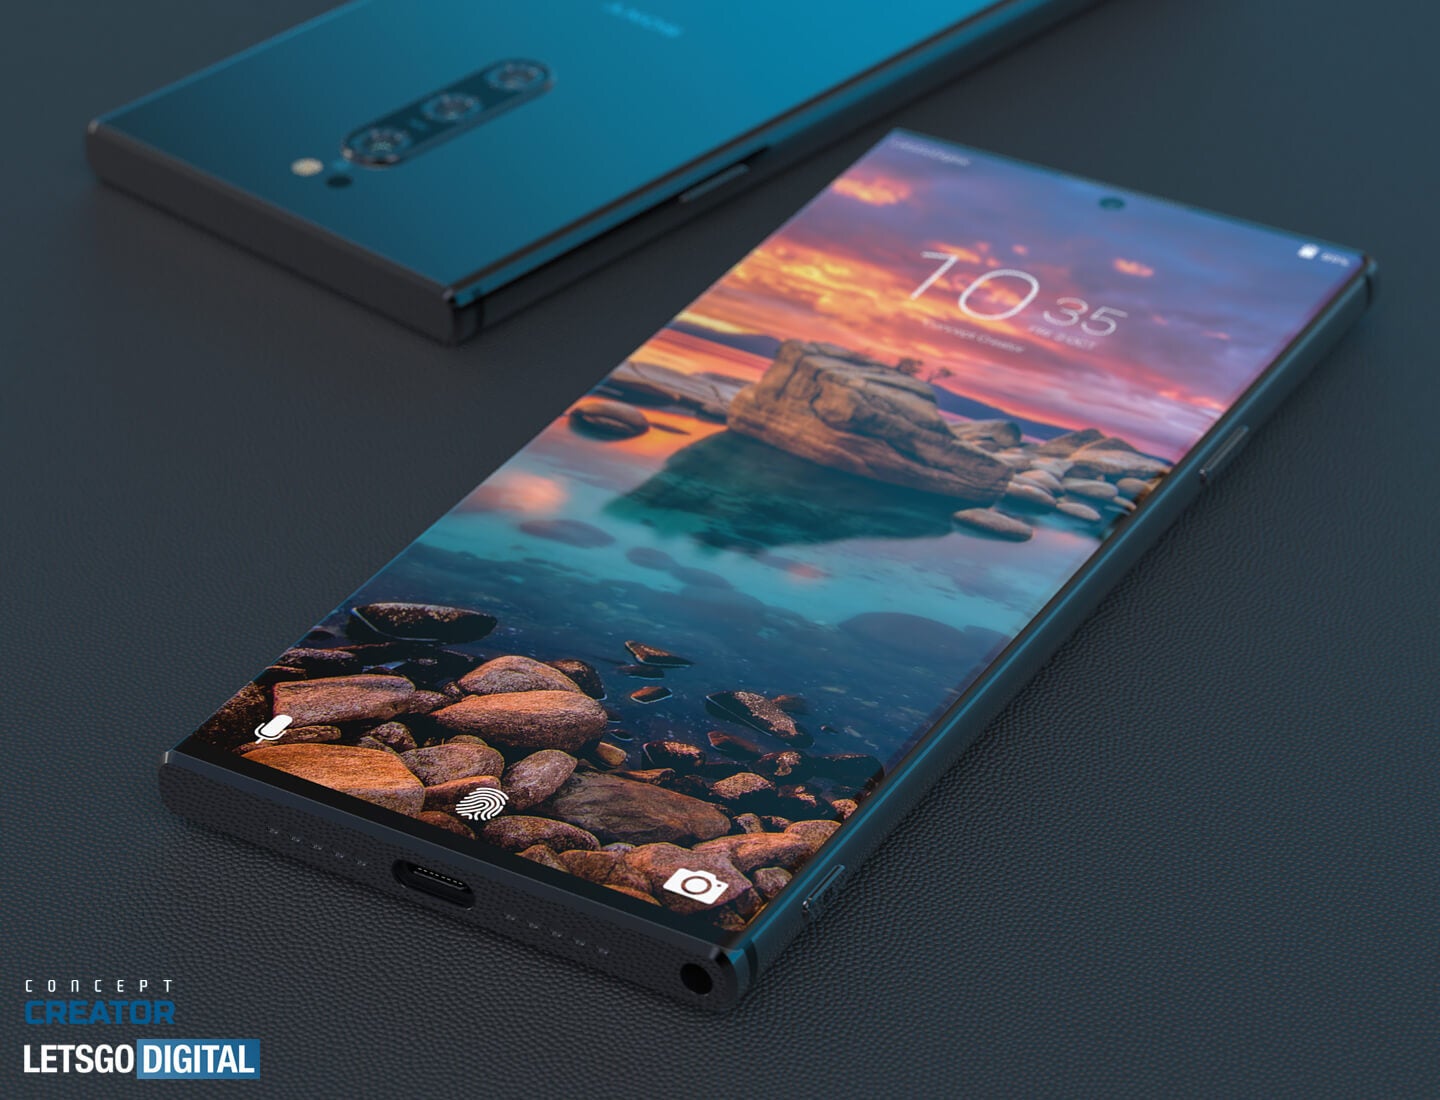 The Xperia 5 ii 5G looks gorgeous in these new renders